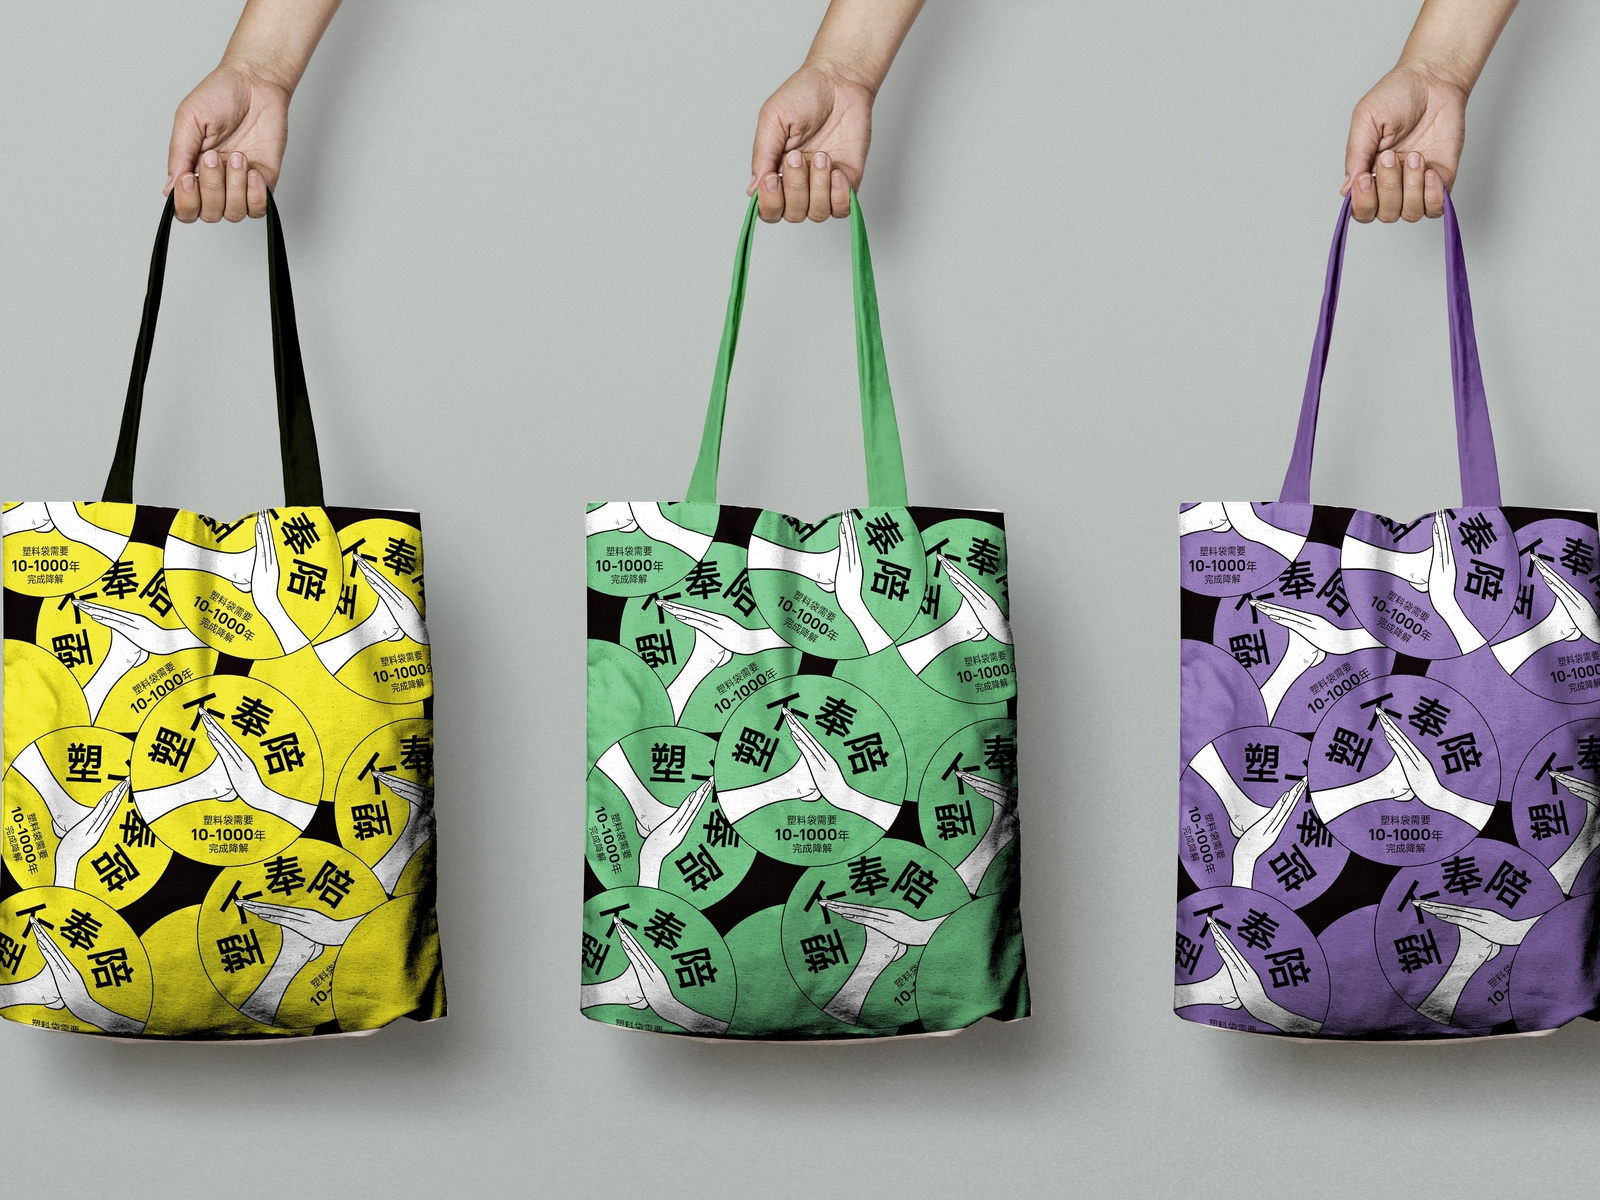 Reusable Bags | Recycled Pre-Printed Shopping Totes